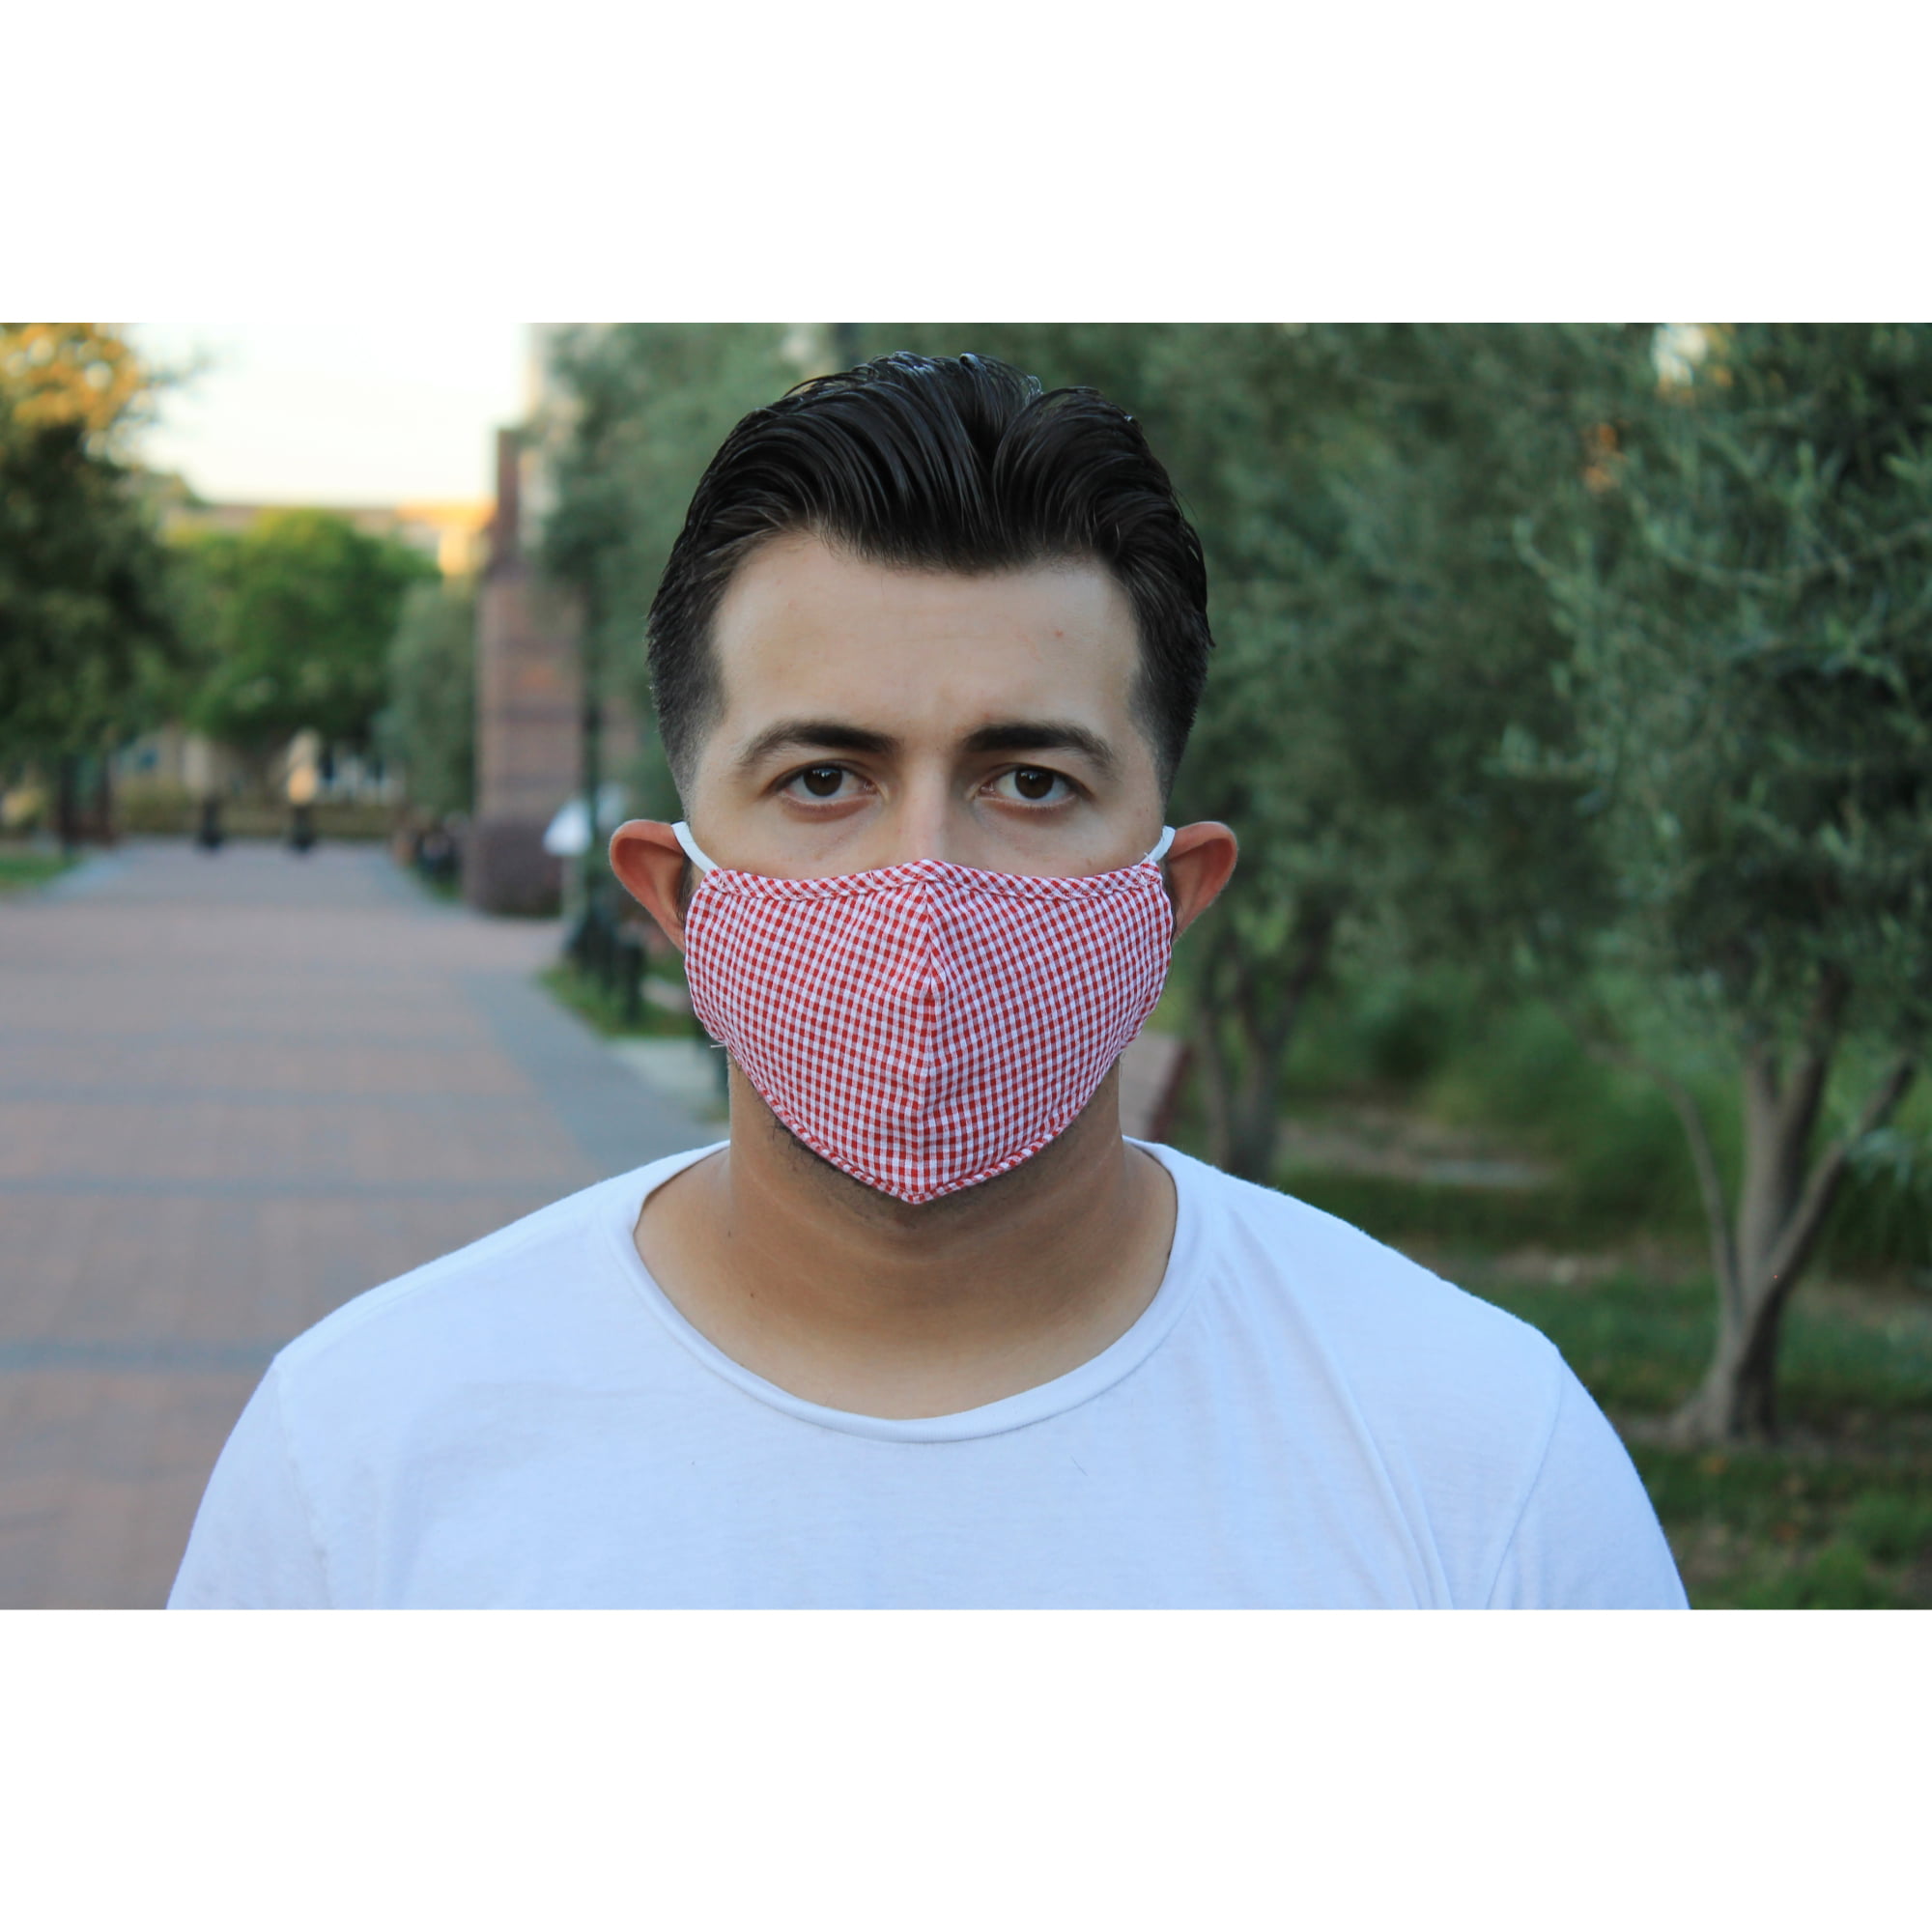 Fashion Pattern Face Mask,Reusable Washable Comfy Warm Face Mouth Cover Unisex Adult 